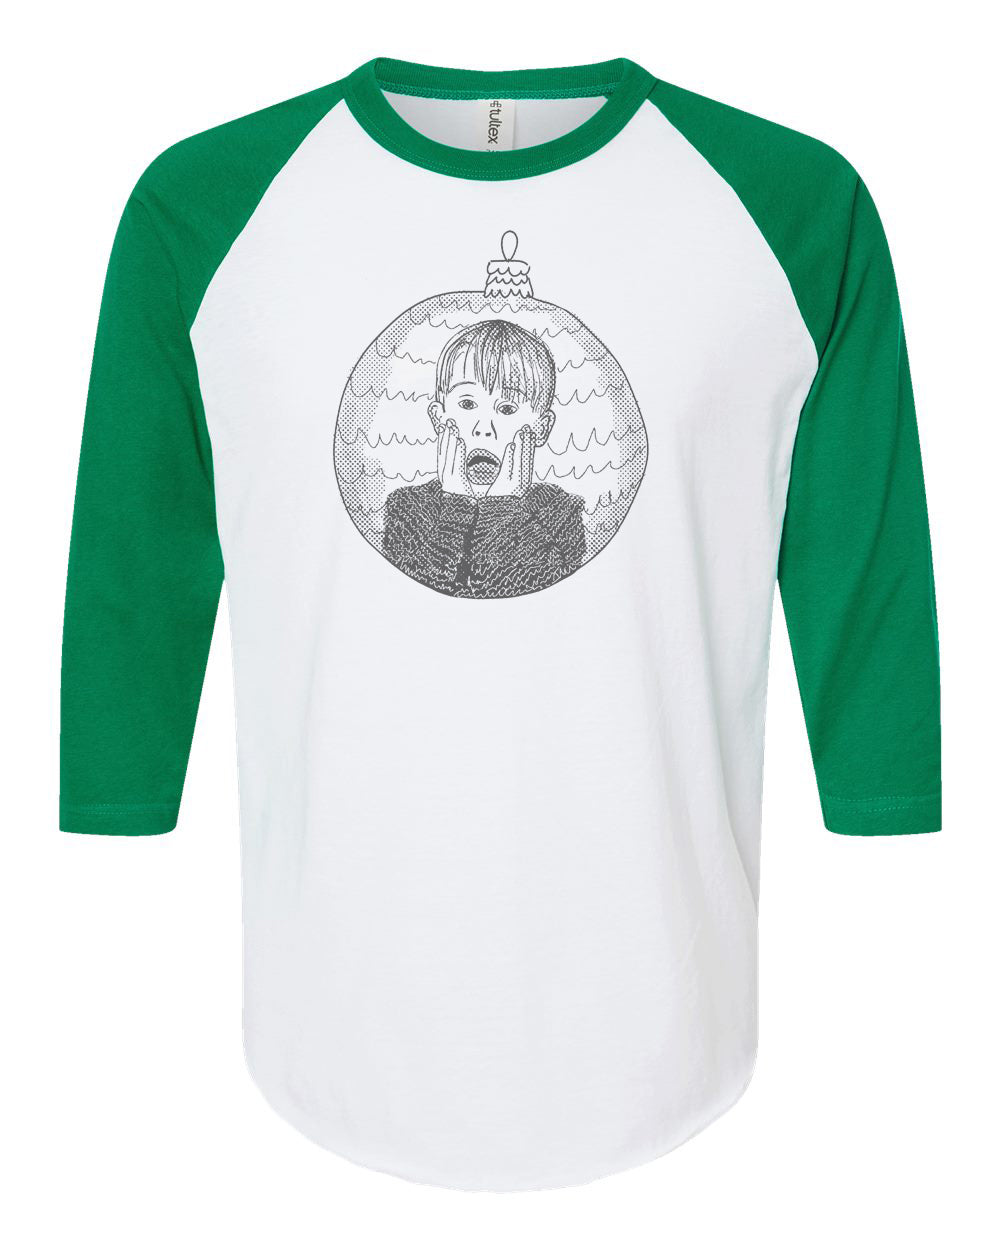 Home Alone : Unisex Baseball Tee (White with Green Sleeves)